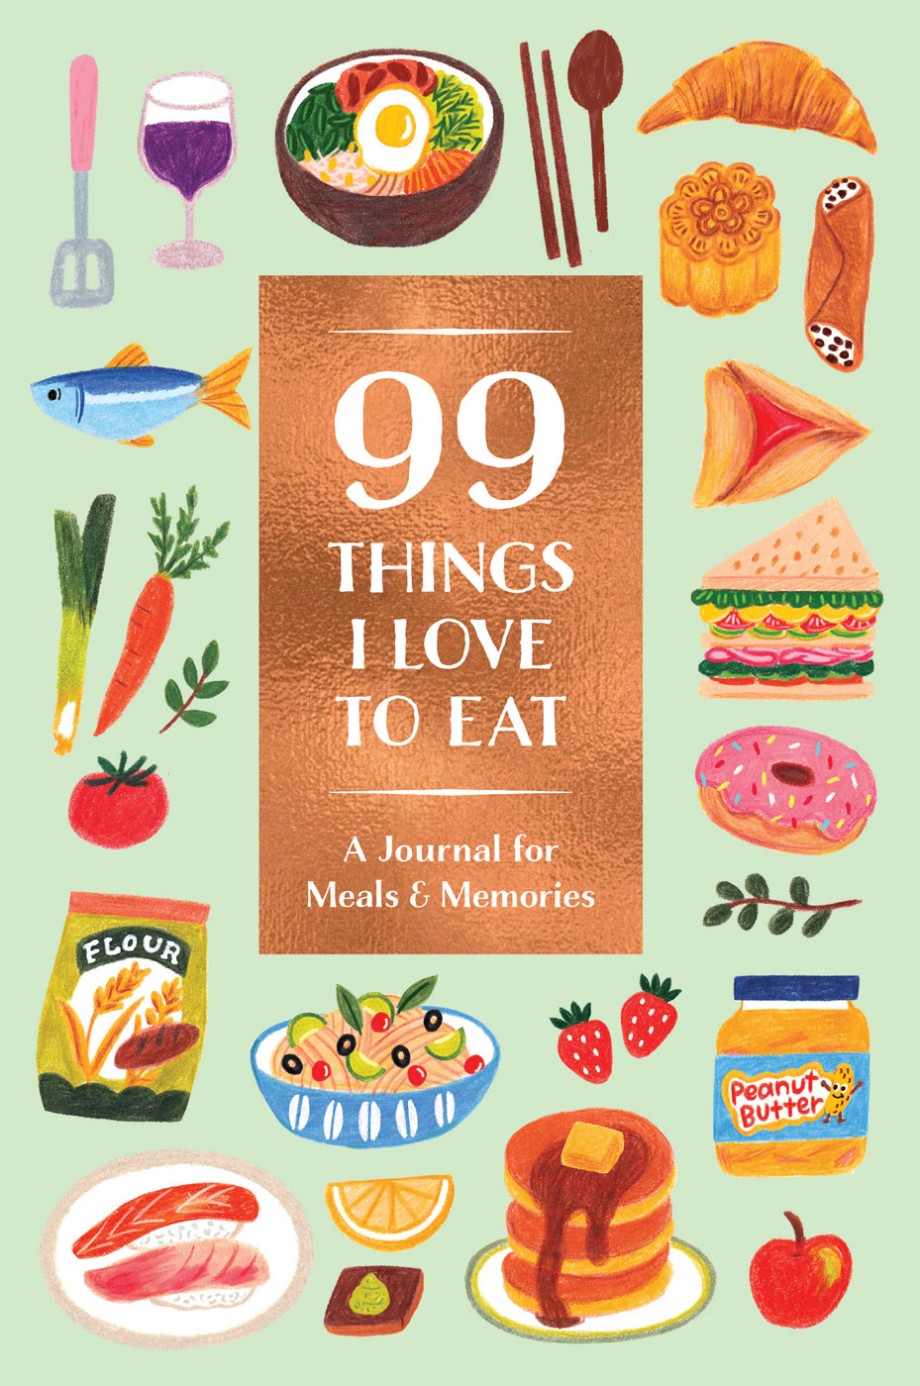 99 Things I Love to Eat (Guided Journal) A Journal for Meals & Memories